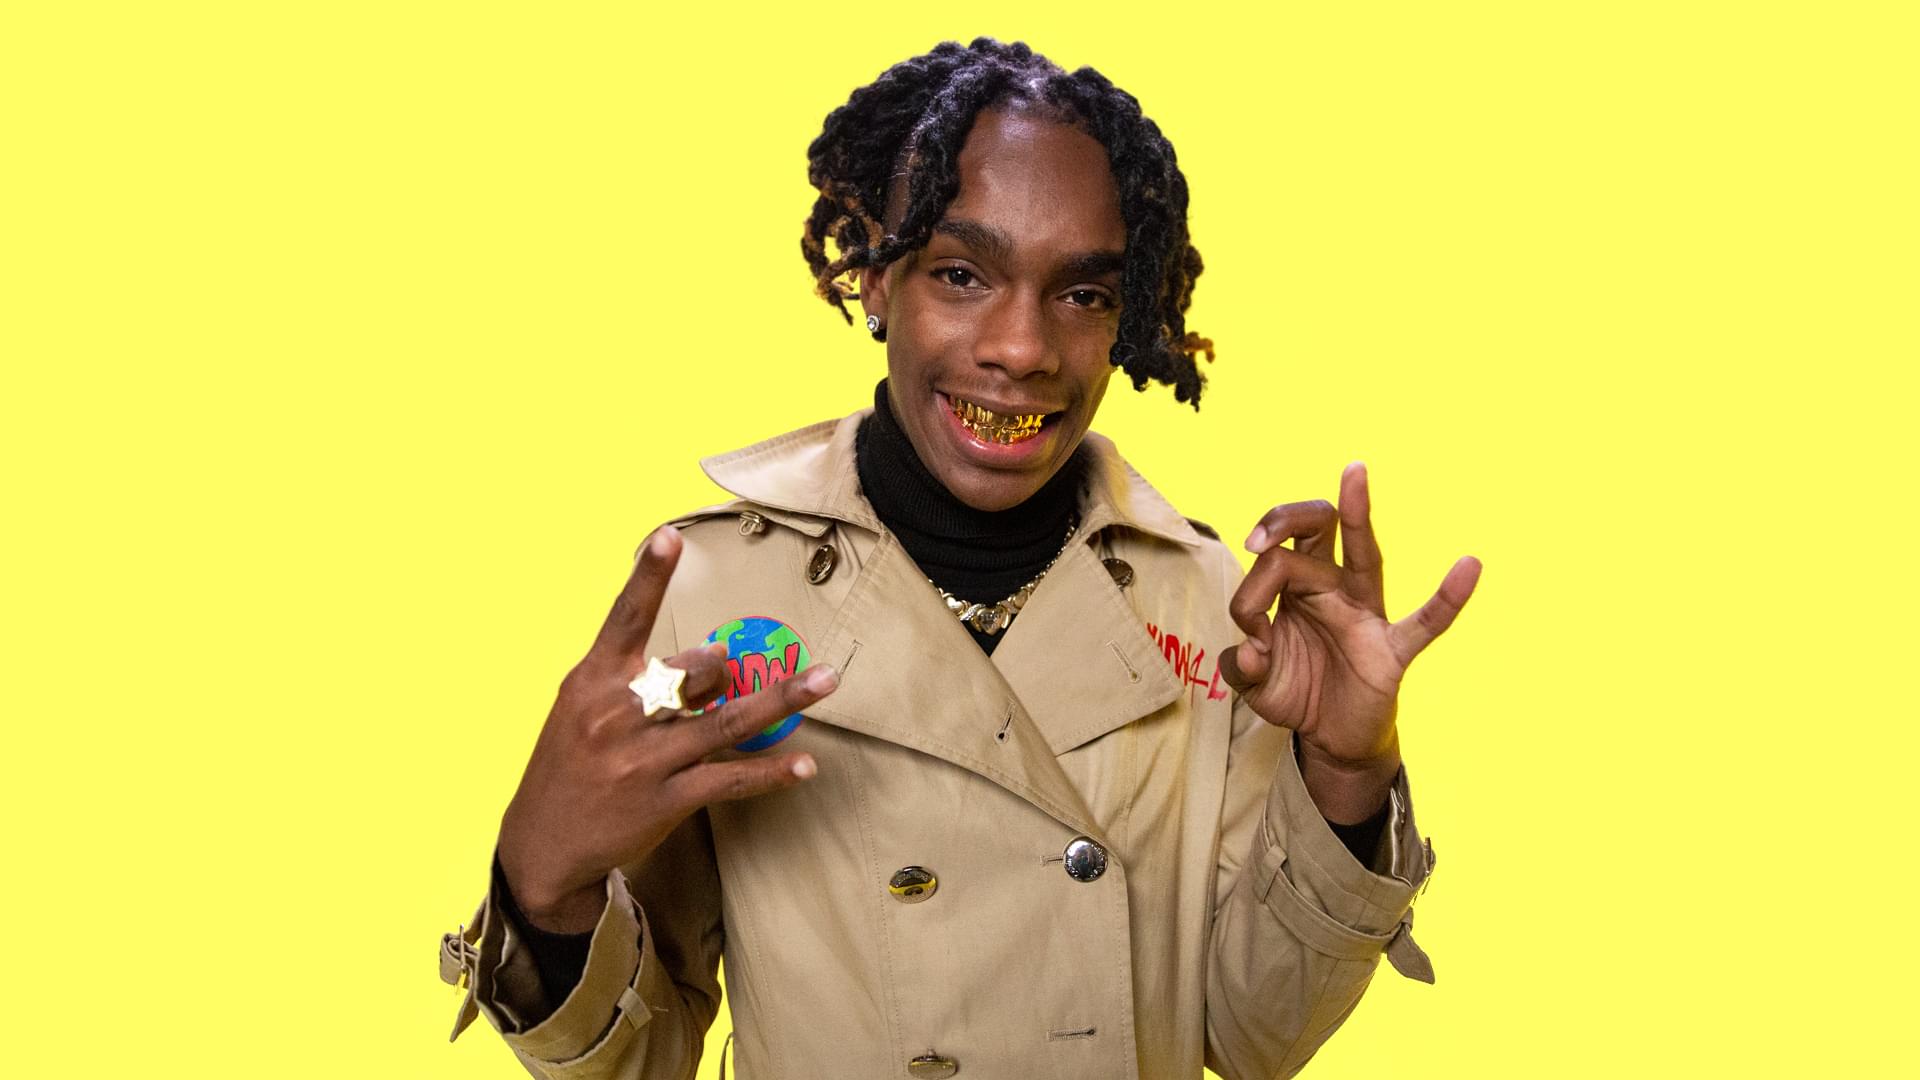 Video - Ynw Melly Murder On My Mind , HD Wallpaper & Backgrounds